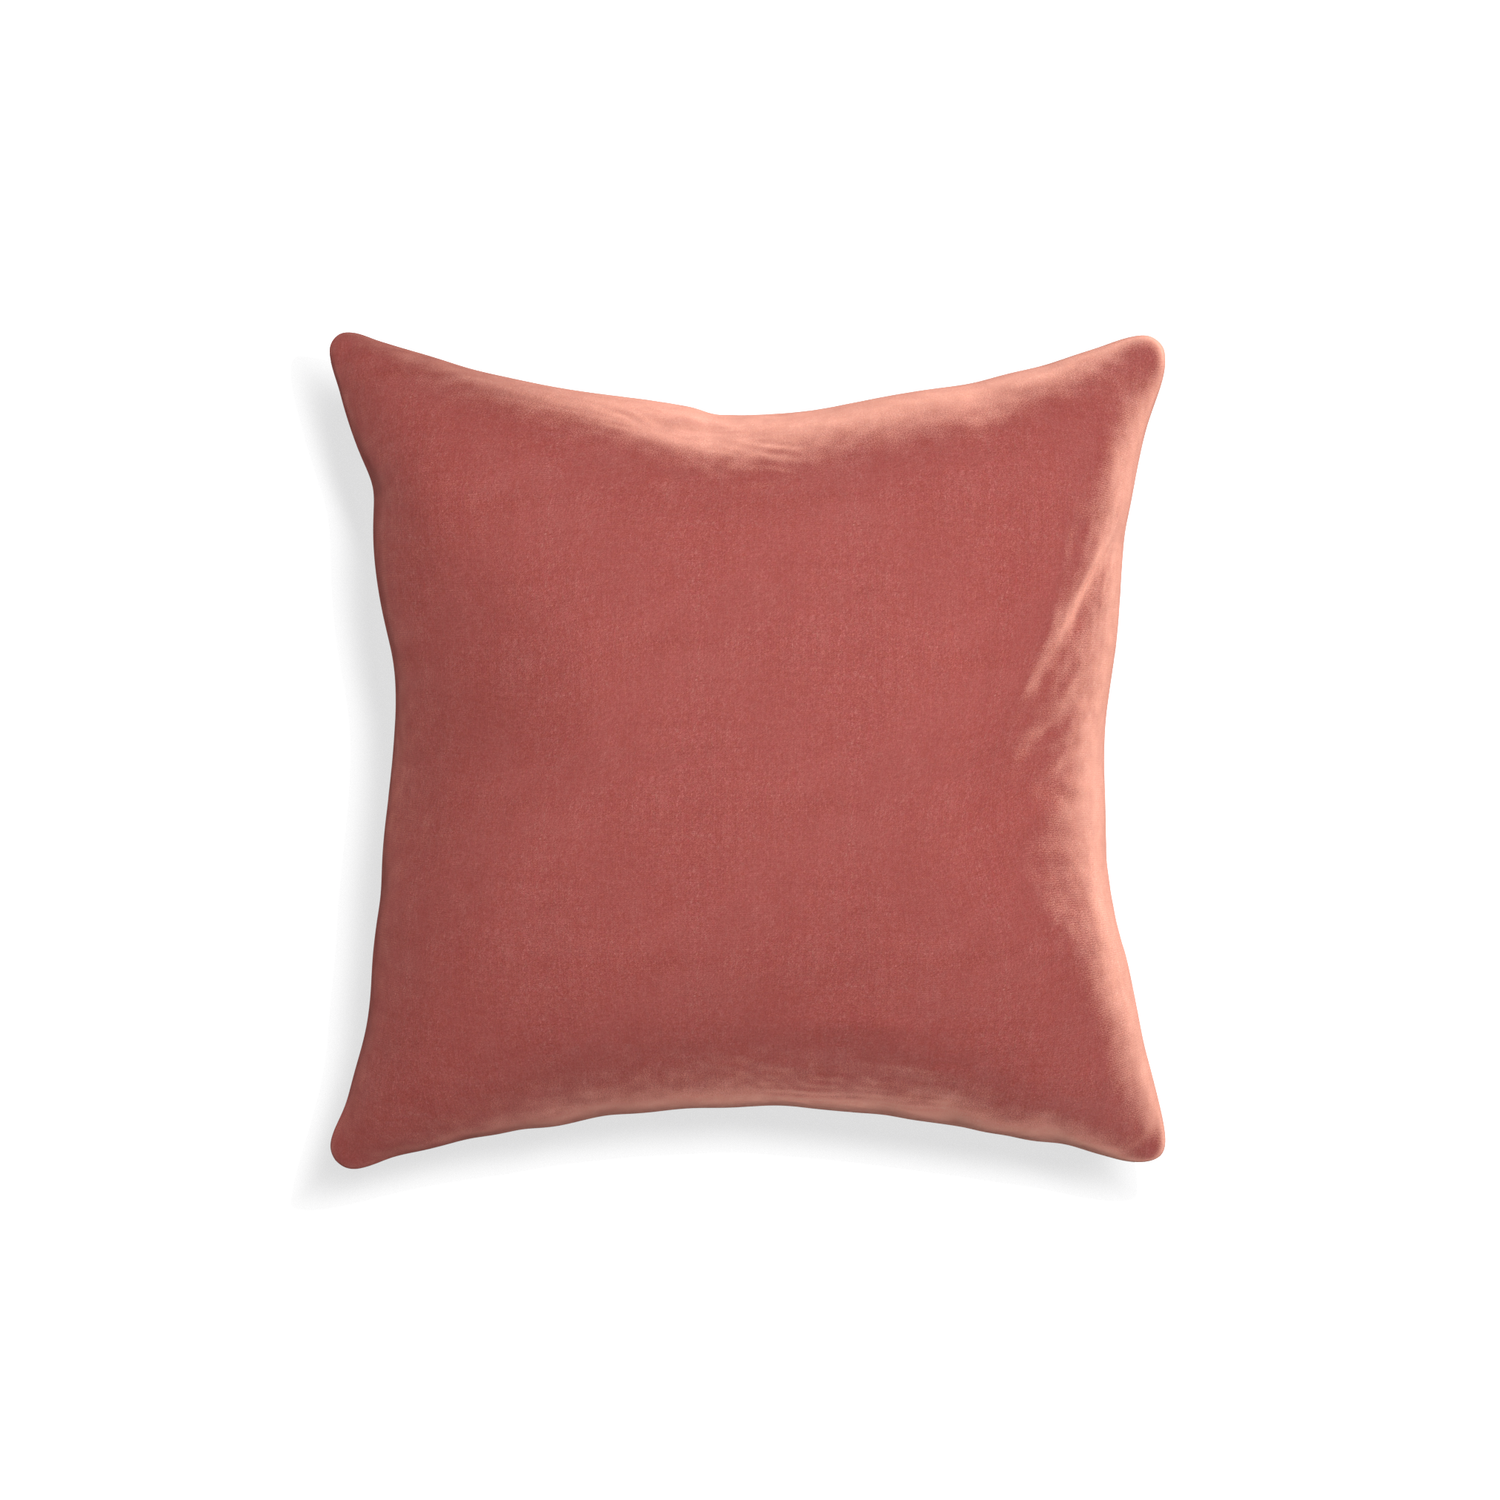 18-square cosmo velvet custom coralpillow with none on white background